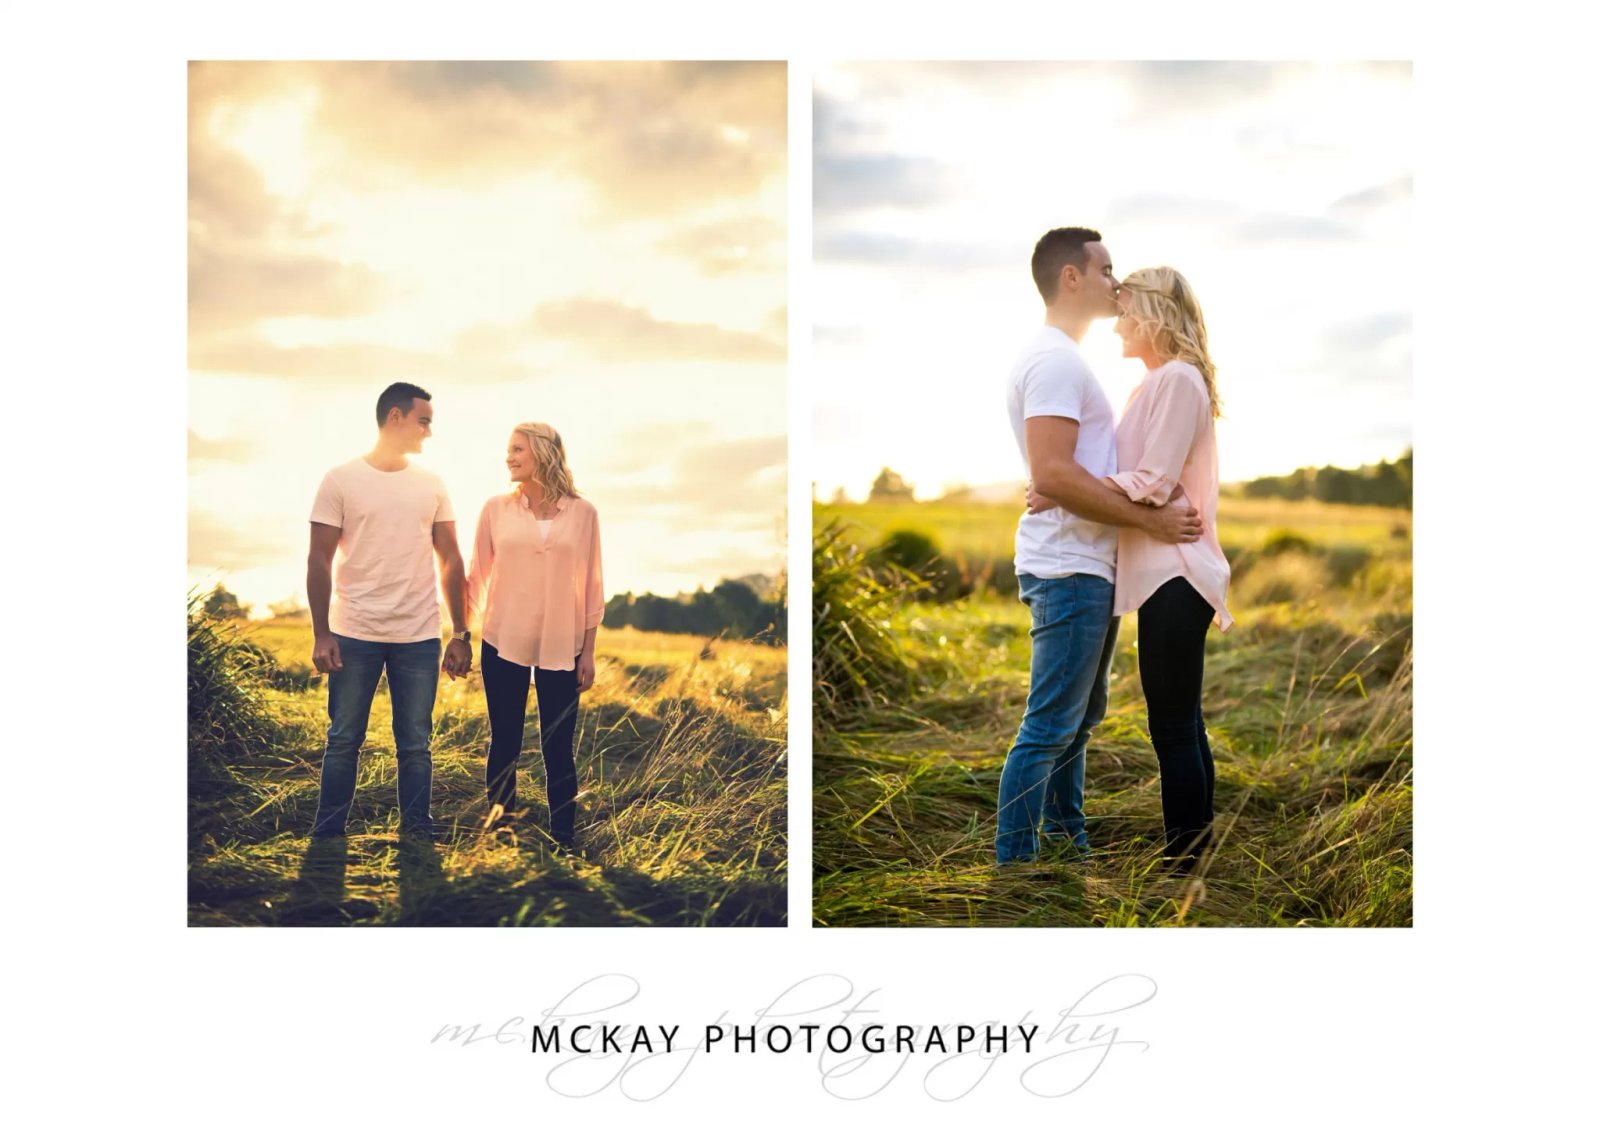 Sunset light at engagement photography session in Bowral